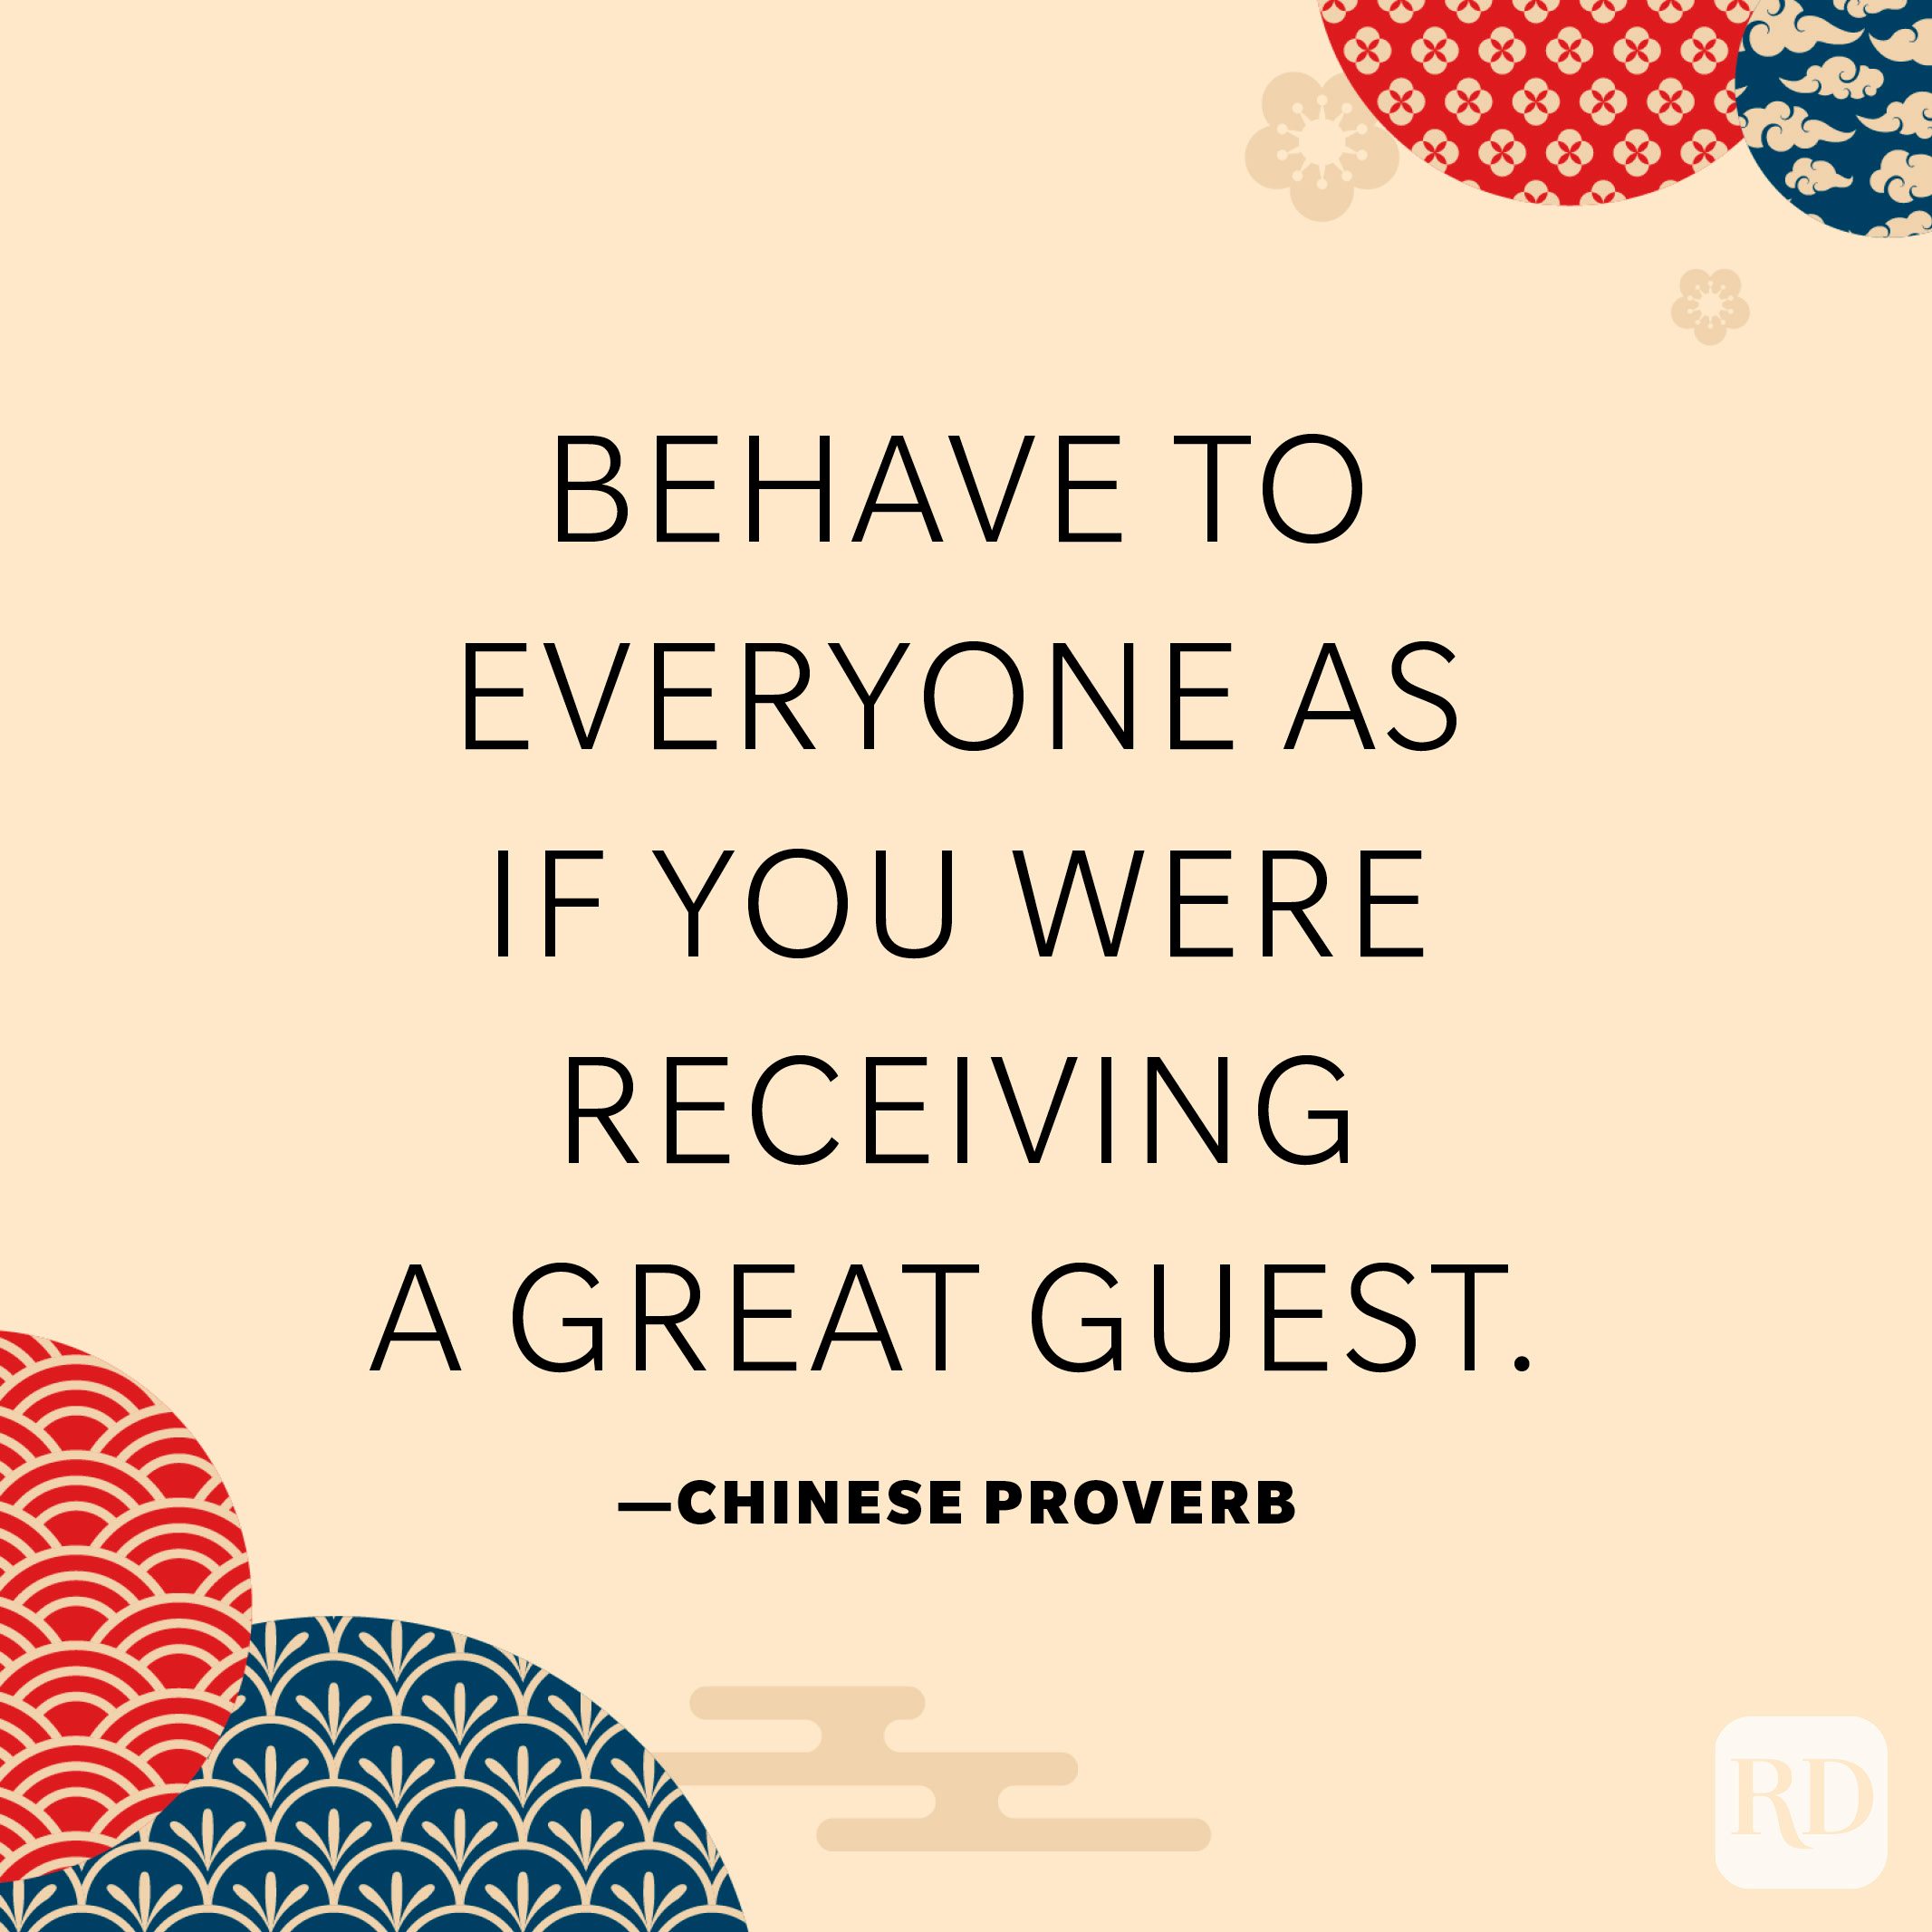 Behave to everyone as if you were receiving a great guest